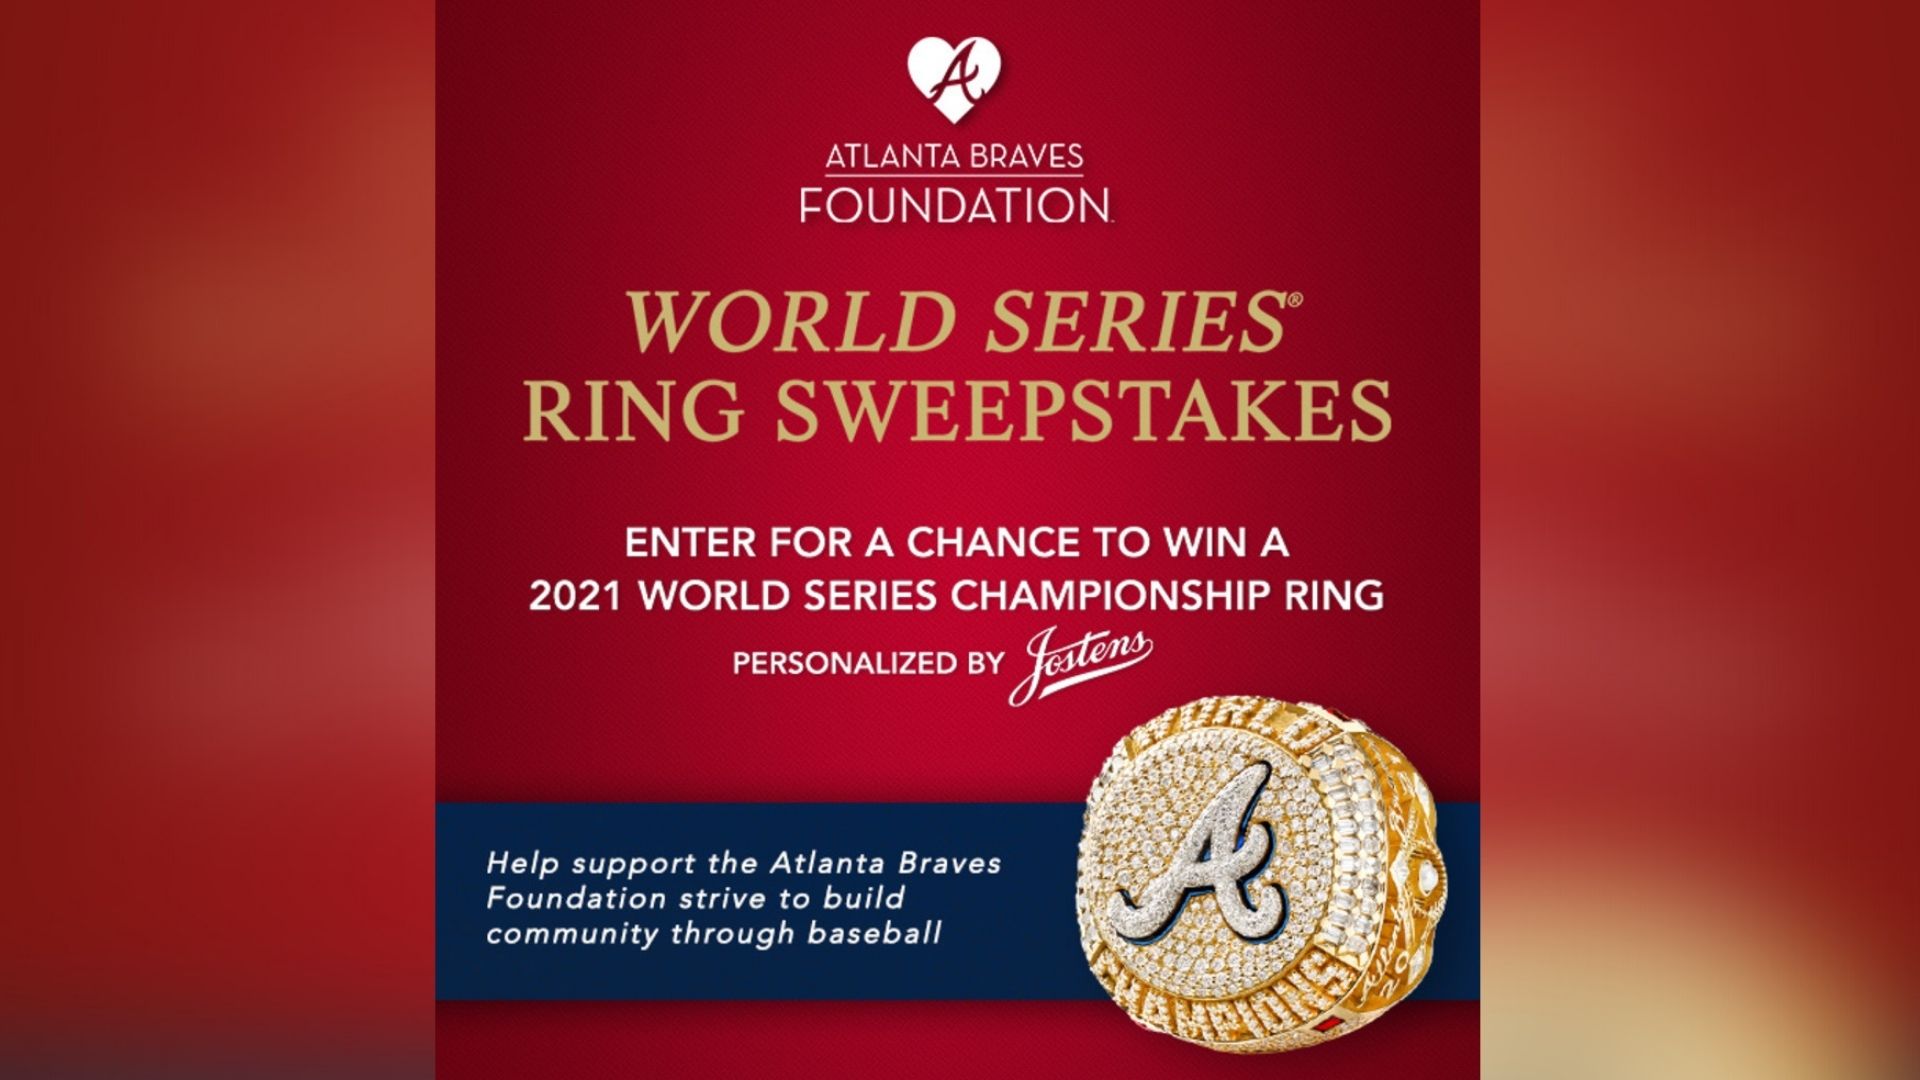 How to win your very own Atlanta Braves World Series Ring